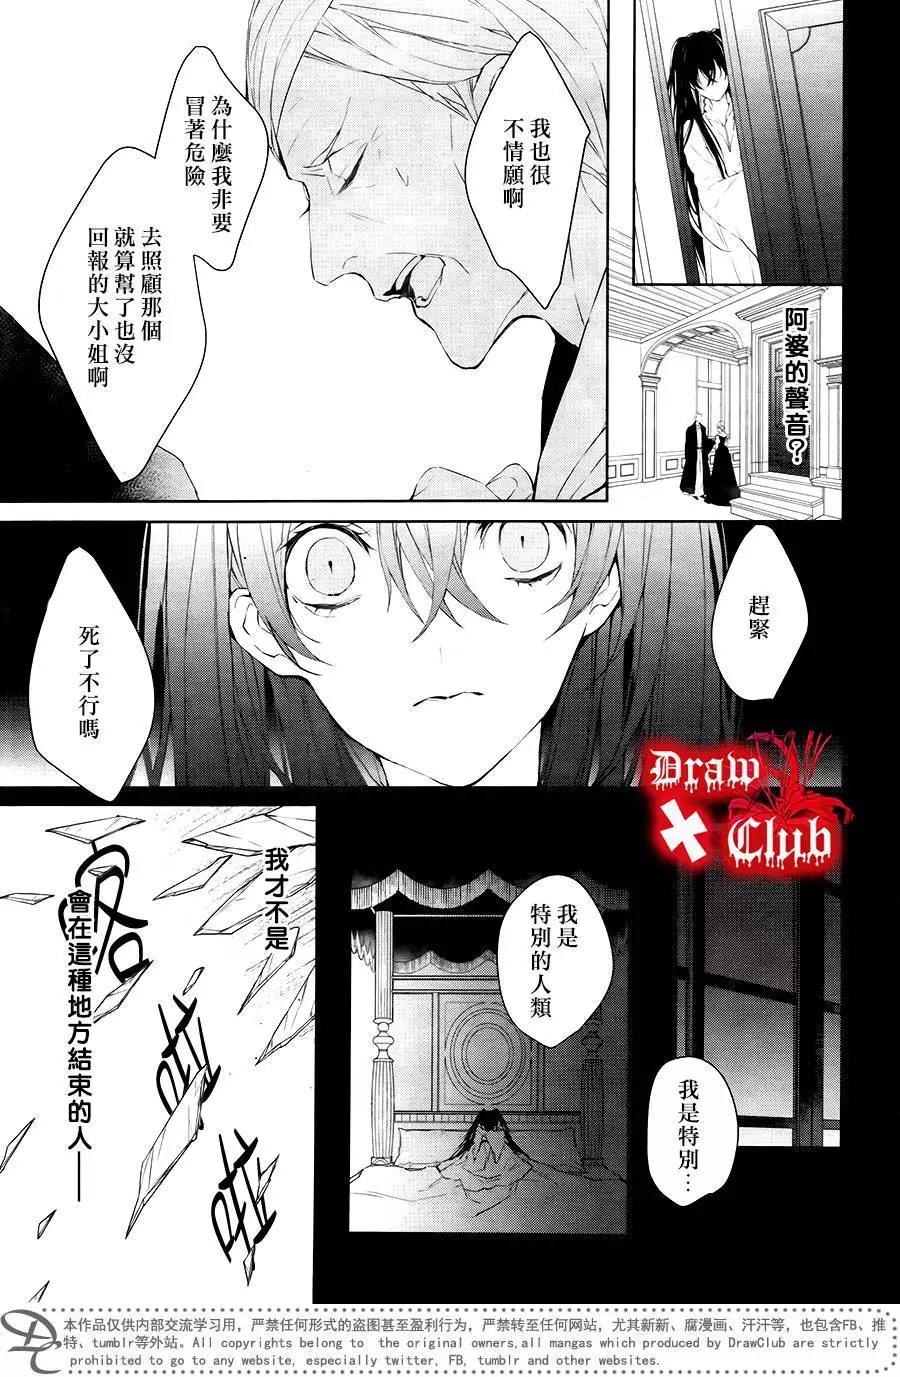 Bloody Mary - 第38回 - 4